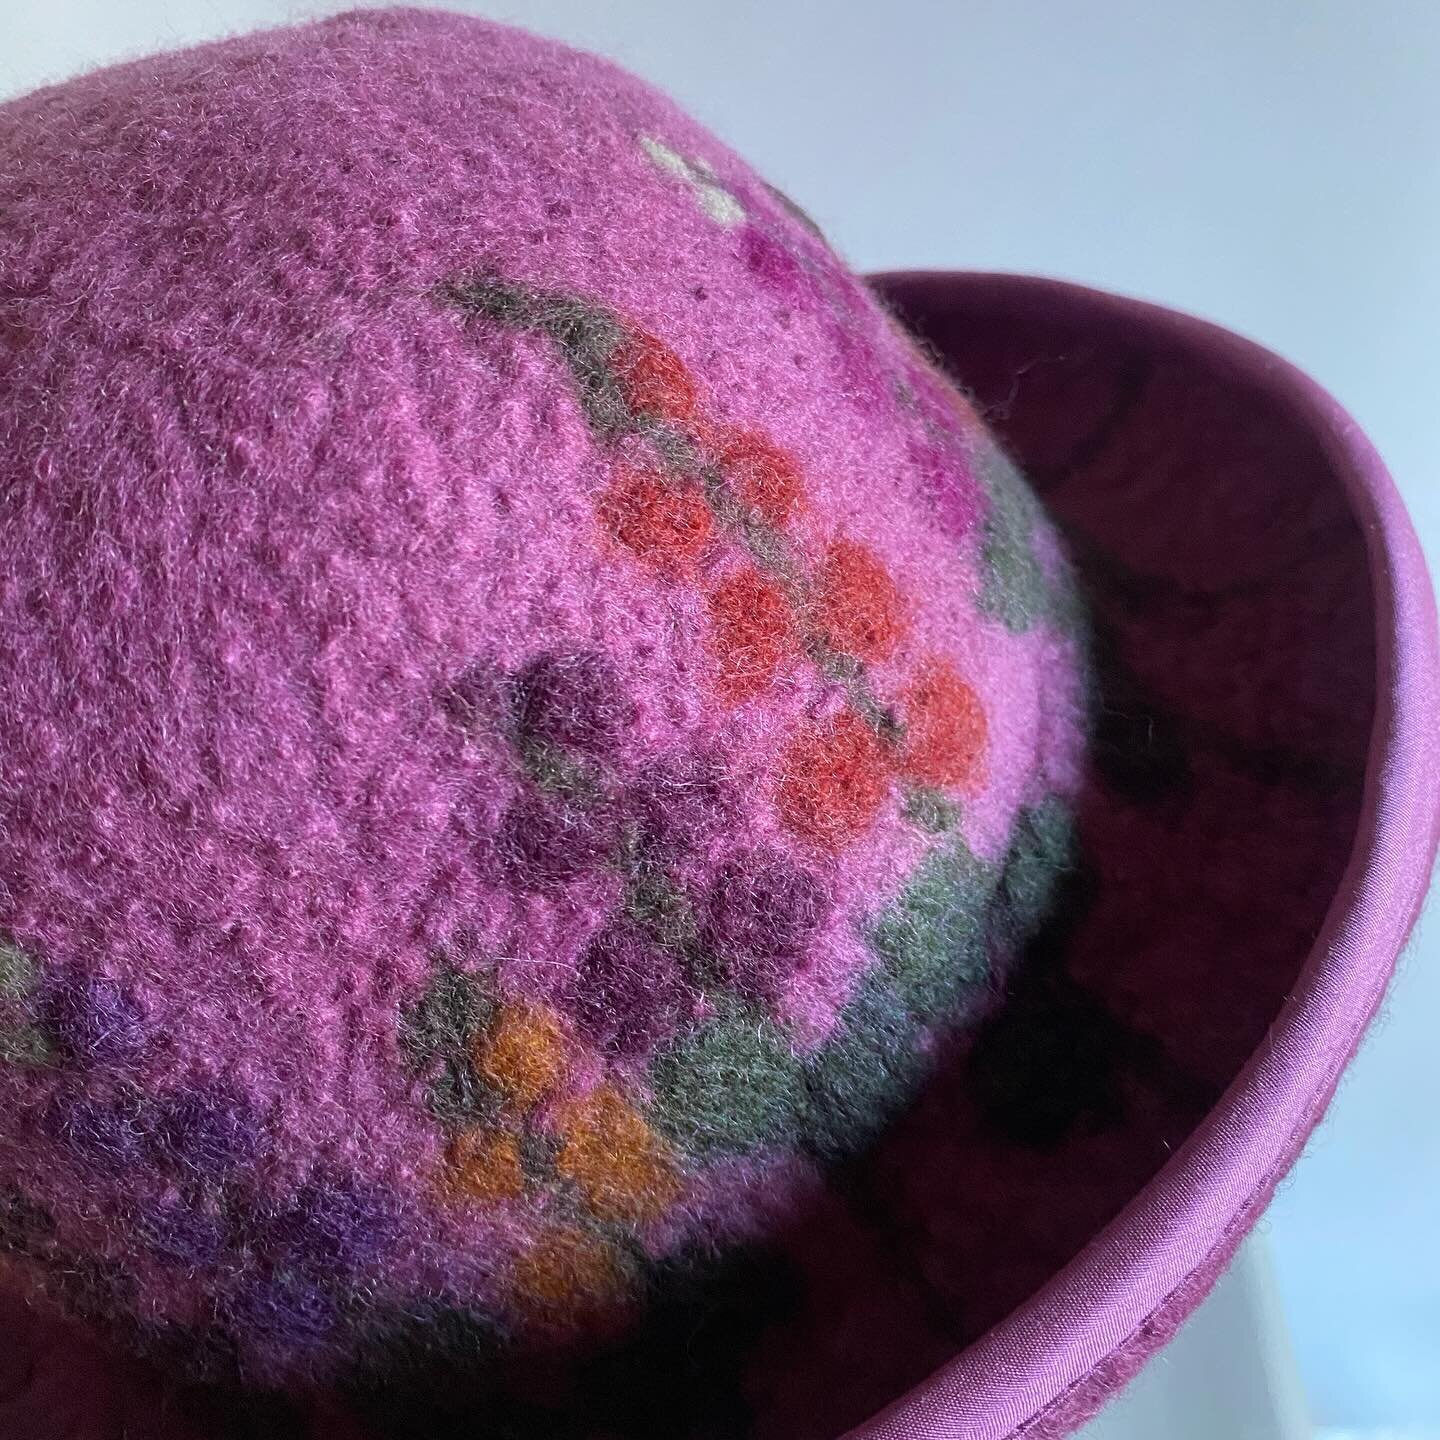 The Eliza asymmetrical derby rockin&rsquo; some Hollyhocks for Capital Crafts in Chantilly, VA this weekend.  Booth 220. 
3rd show in a row 😮&zwj;💨😜🏃&zwj;♀️

#ooakhat #handfeltedhats #handmadehats #buyhandmade #hollyhocks #wintergarden #pinkhat #